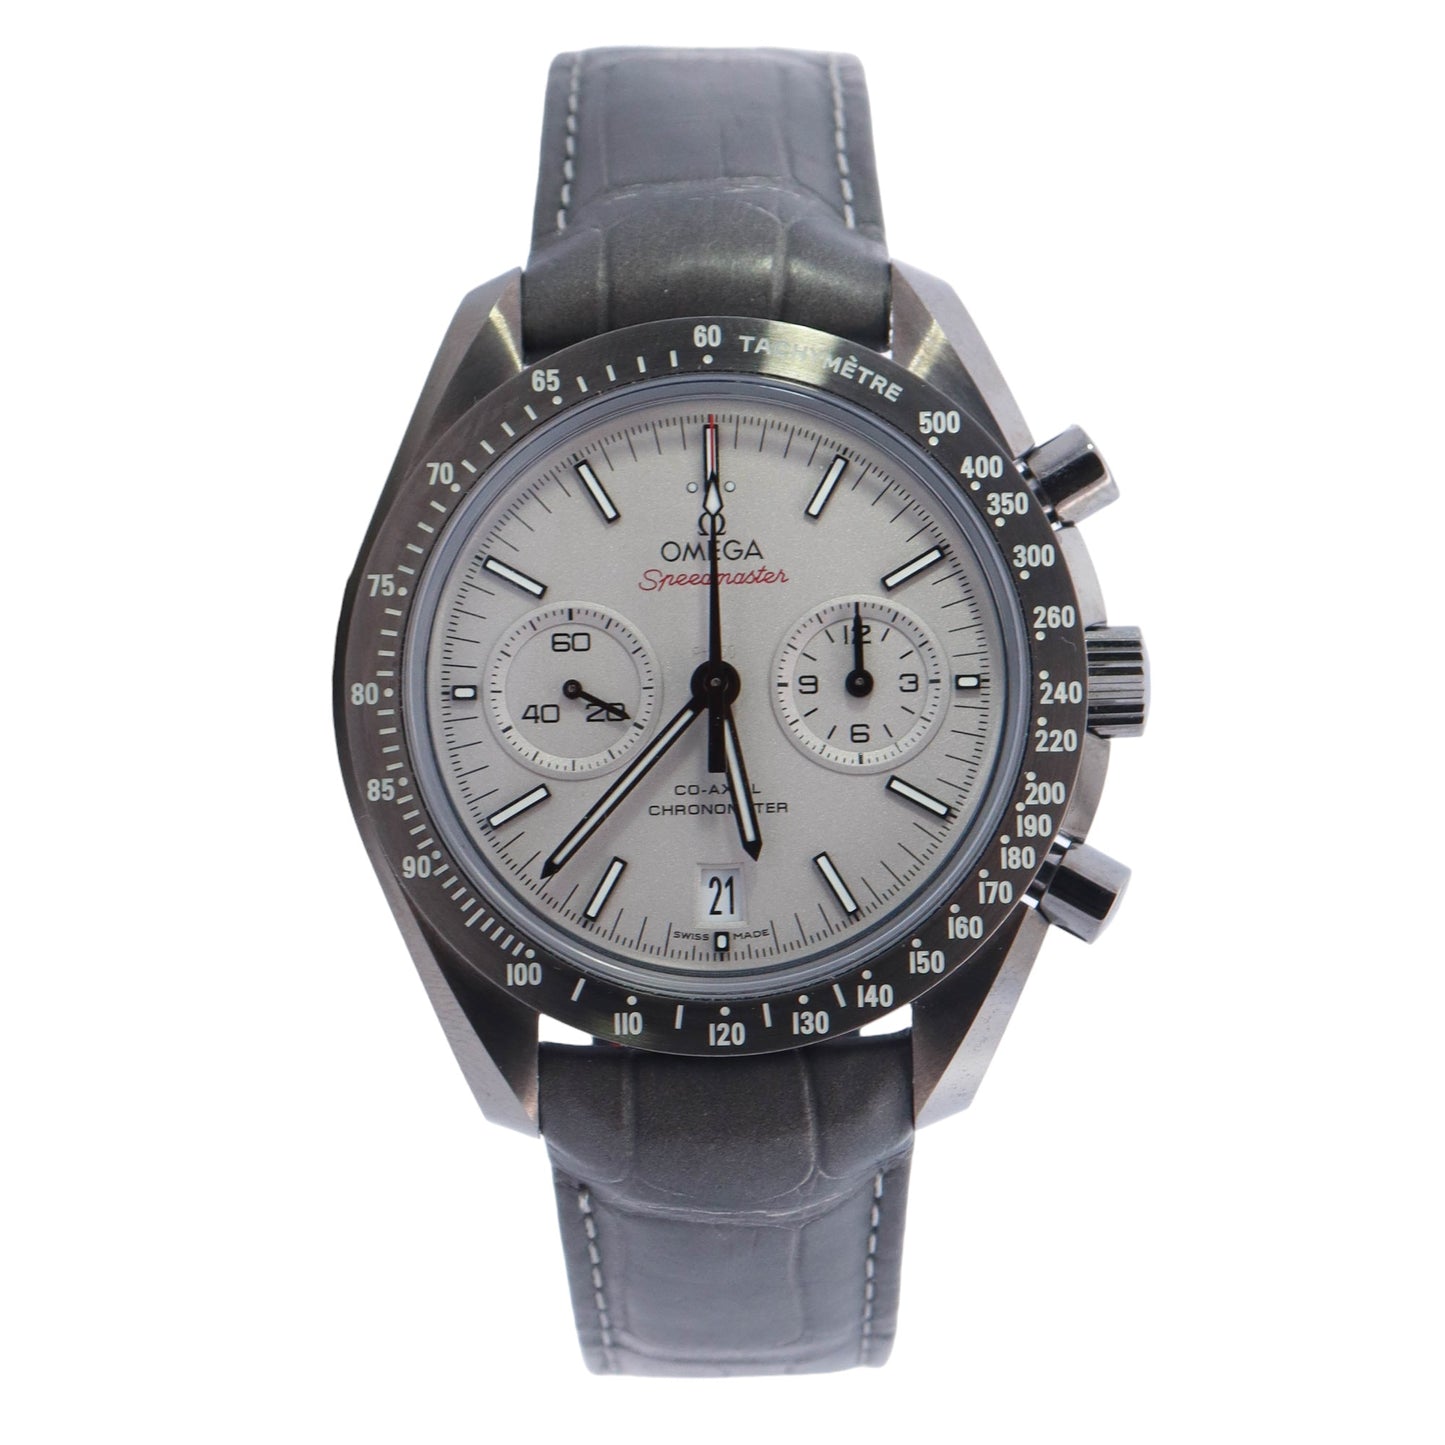 Omega Speedmaster "Grey Side Of The Moon" Ceramic Light Grey Chronograph Dial Watch Reference# 311.93.44.51.99.002